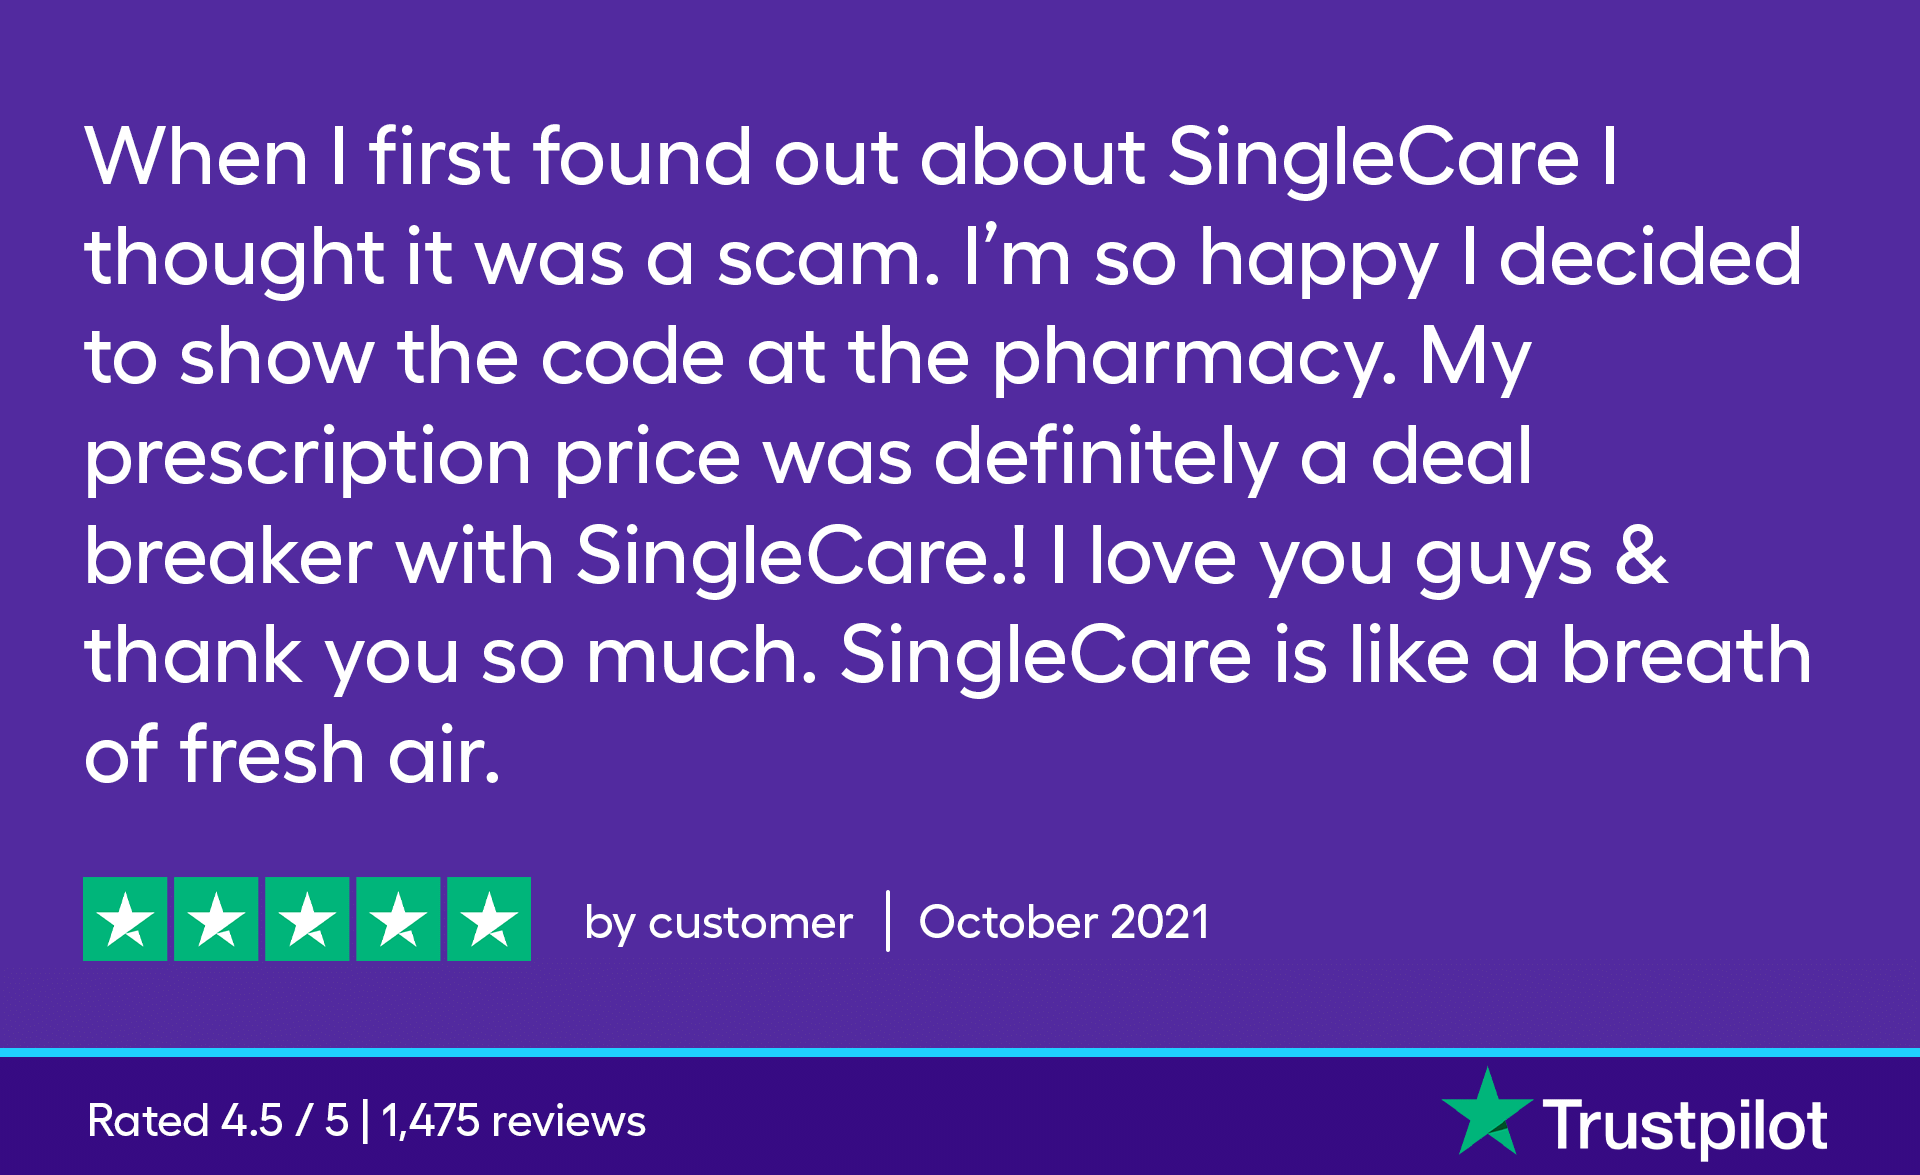 When I first found out about SingleCare I thought it was a scam. I'm so happy I decided to show the code at the pharmacy. My prescription price was definitely a deal breaker with SingleCare.! I love you guys and thank you so much. SingleCare is like a breath of fresh air.